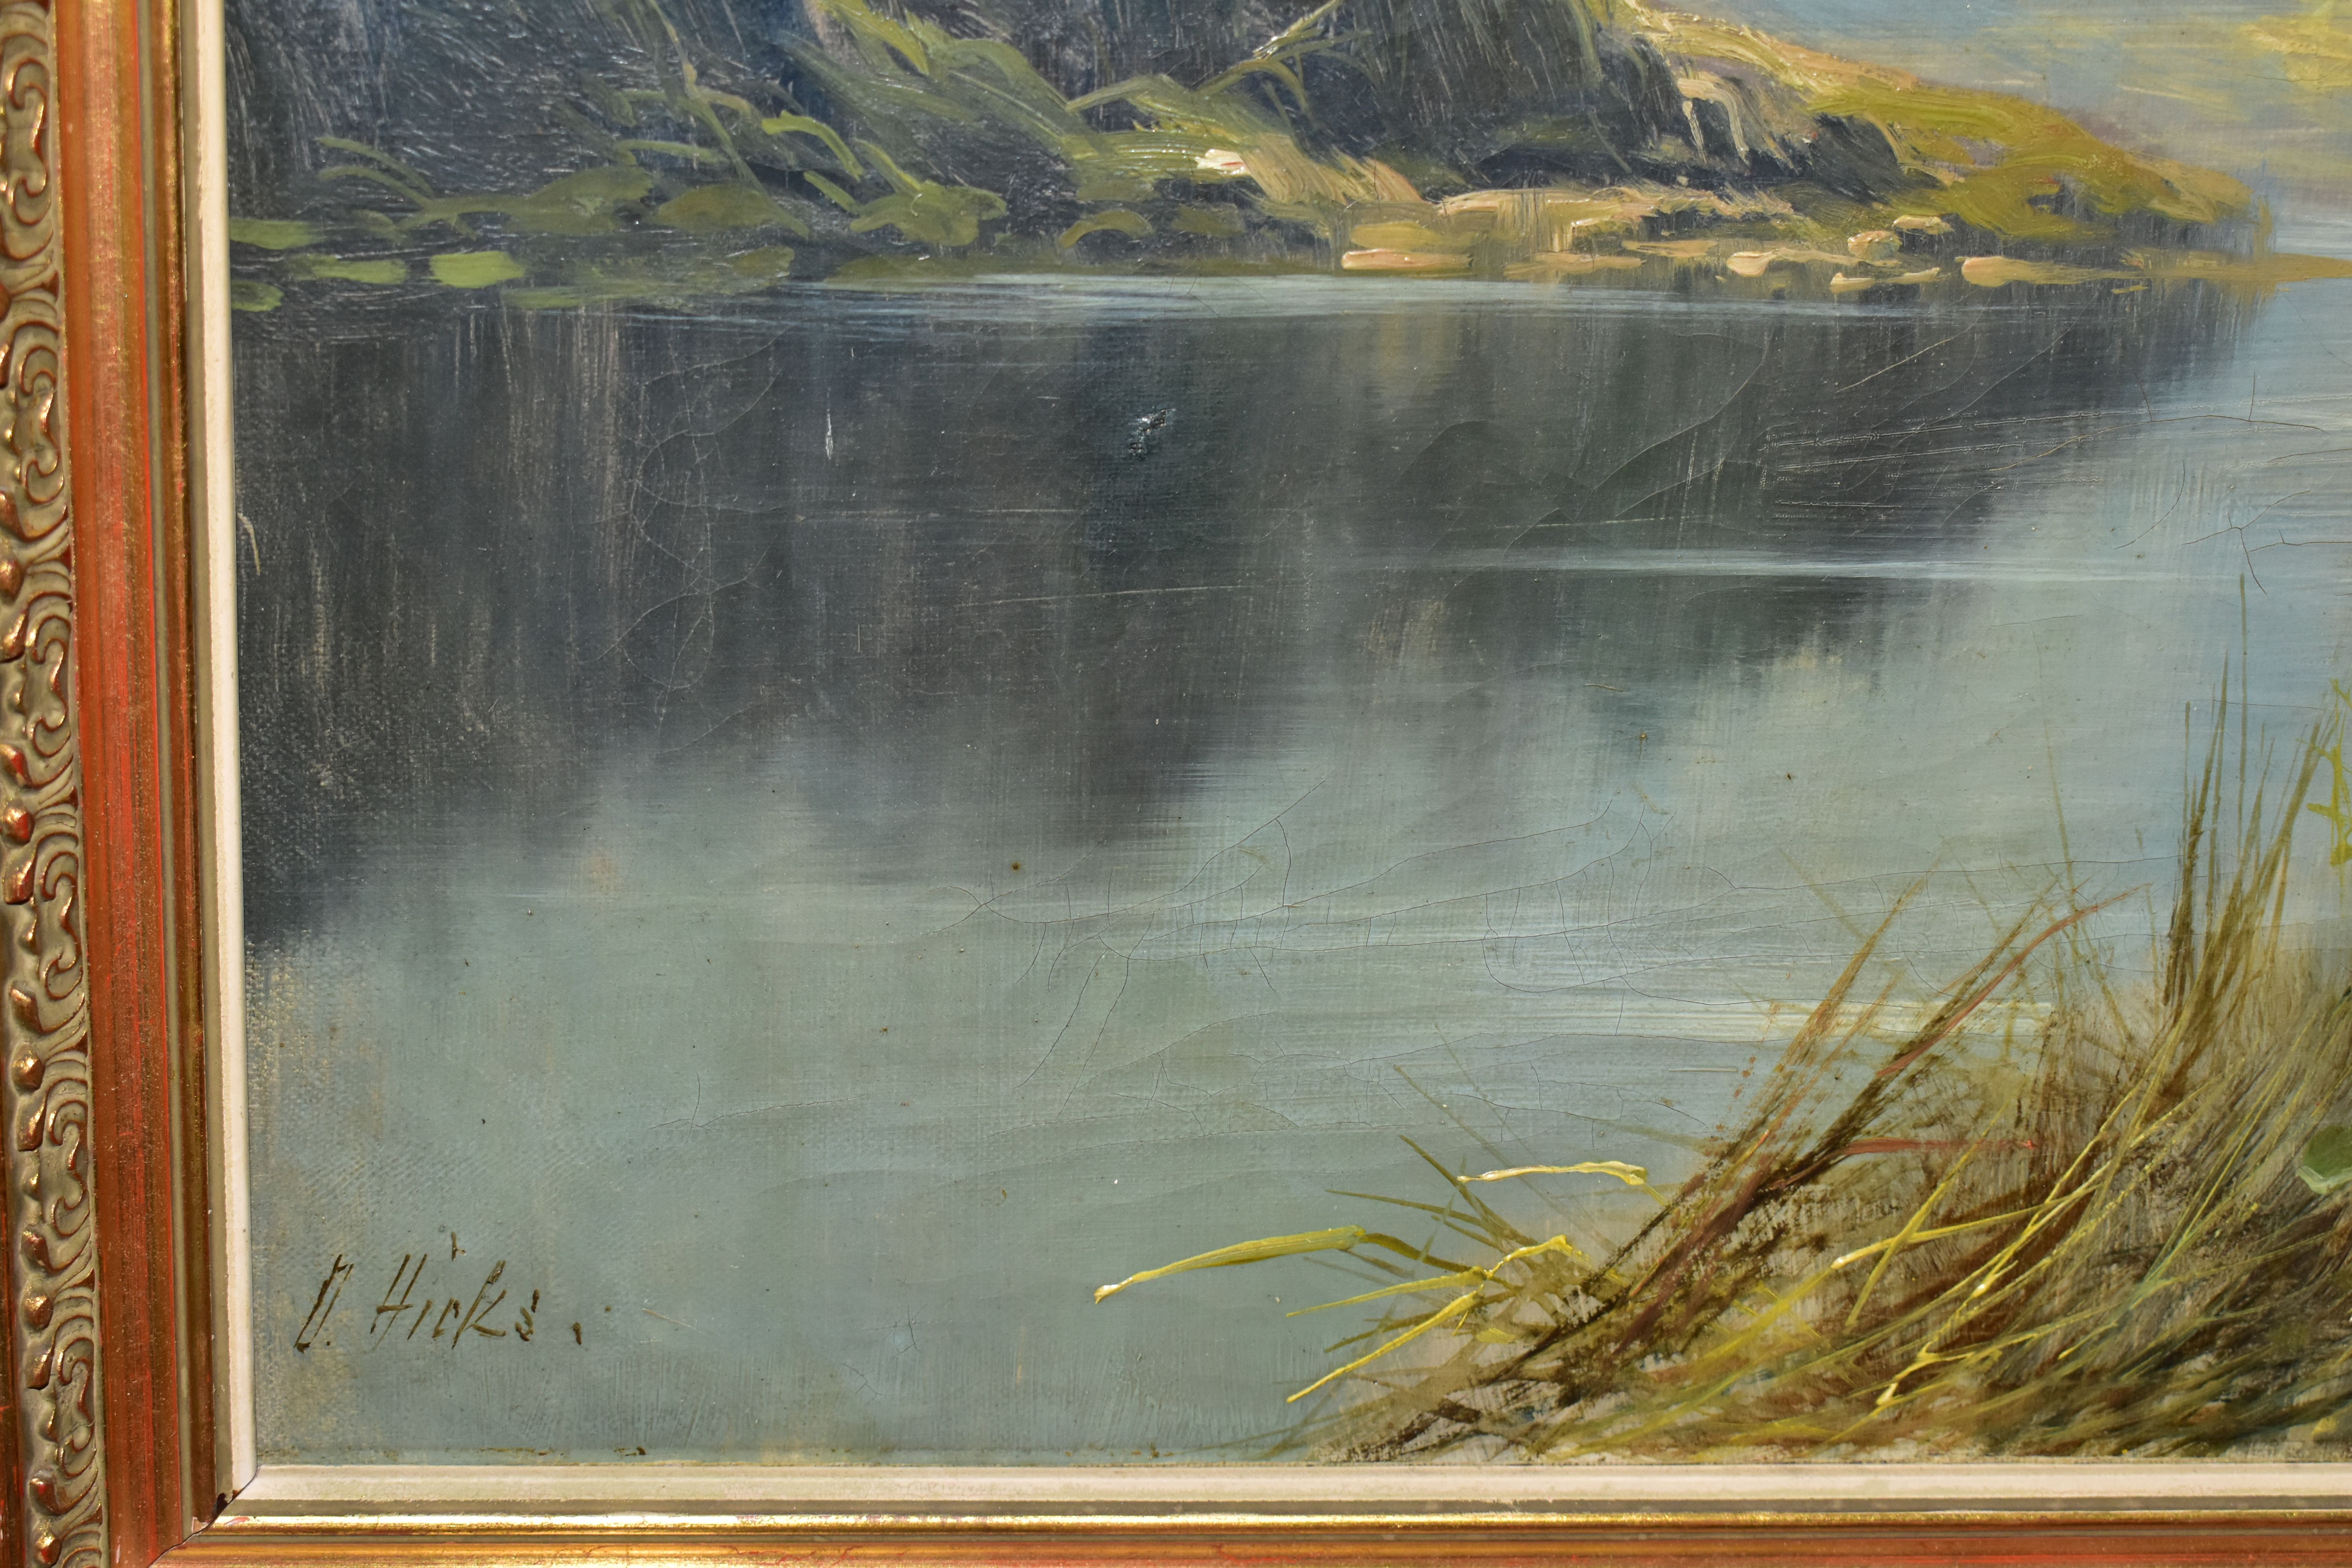 DAVID HICKS (19TH / 20TH CENTURY) A SCOTTISH LANDSCAPE SCENE, depicting a footpath beside a Loch - Image 3 of 6